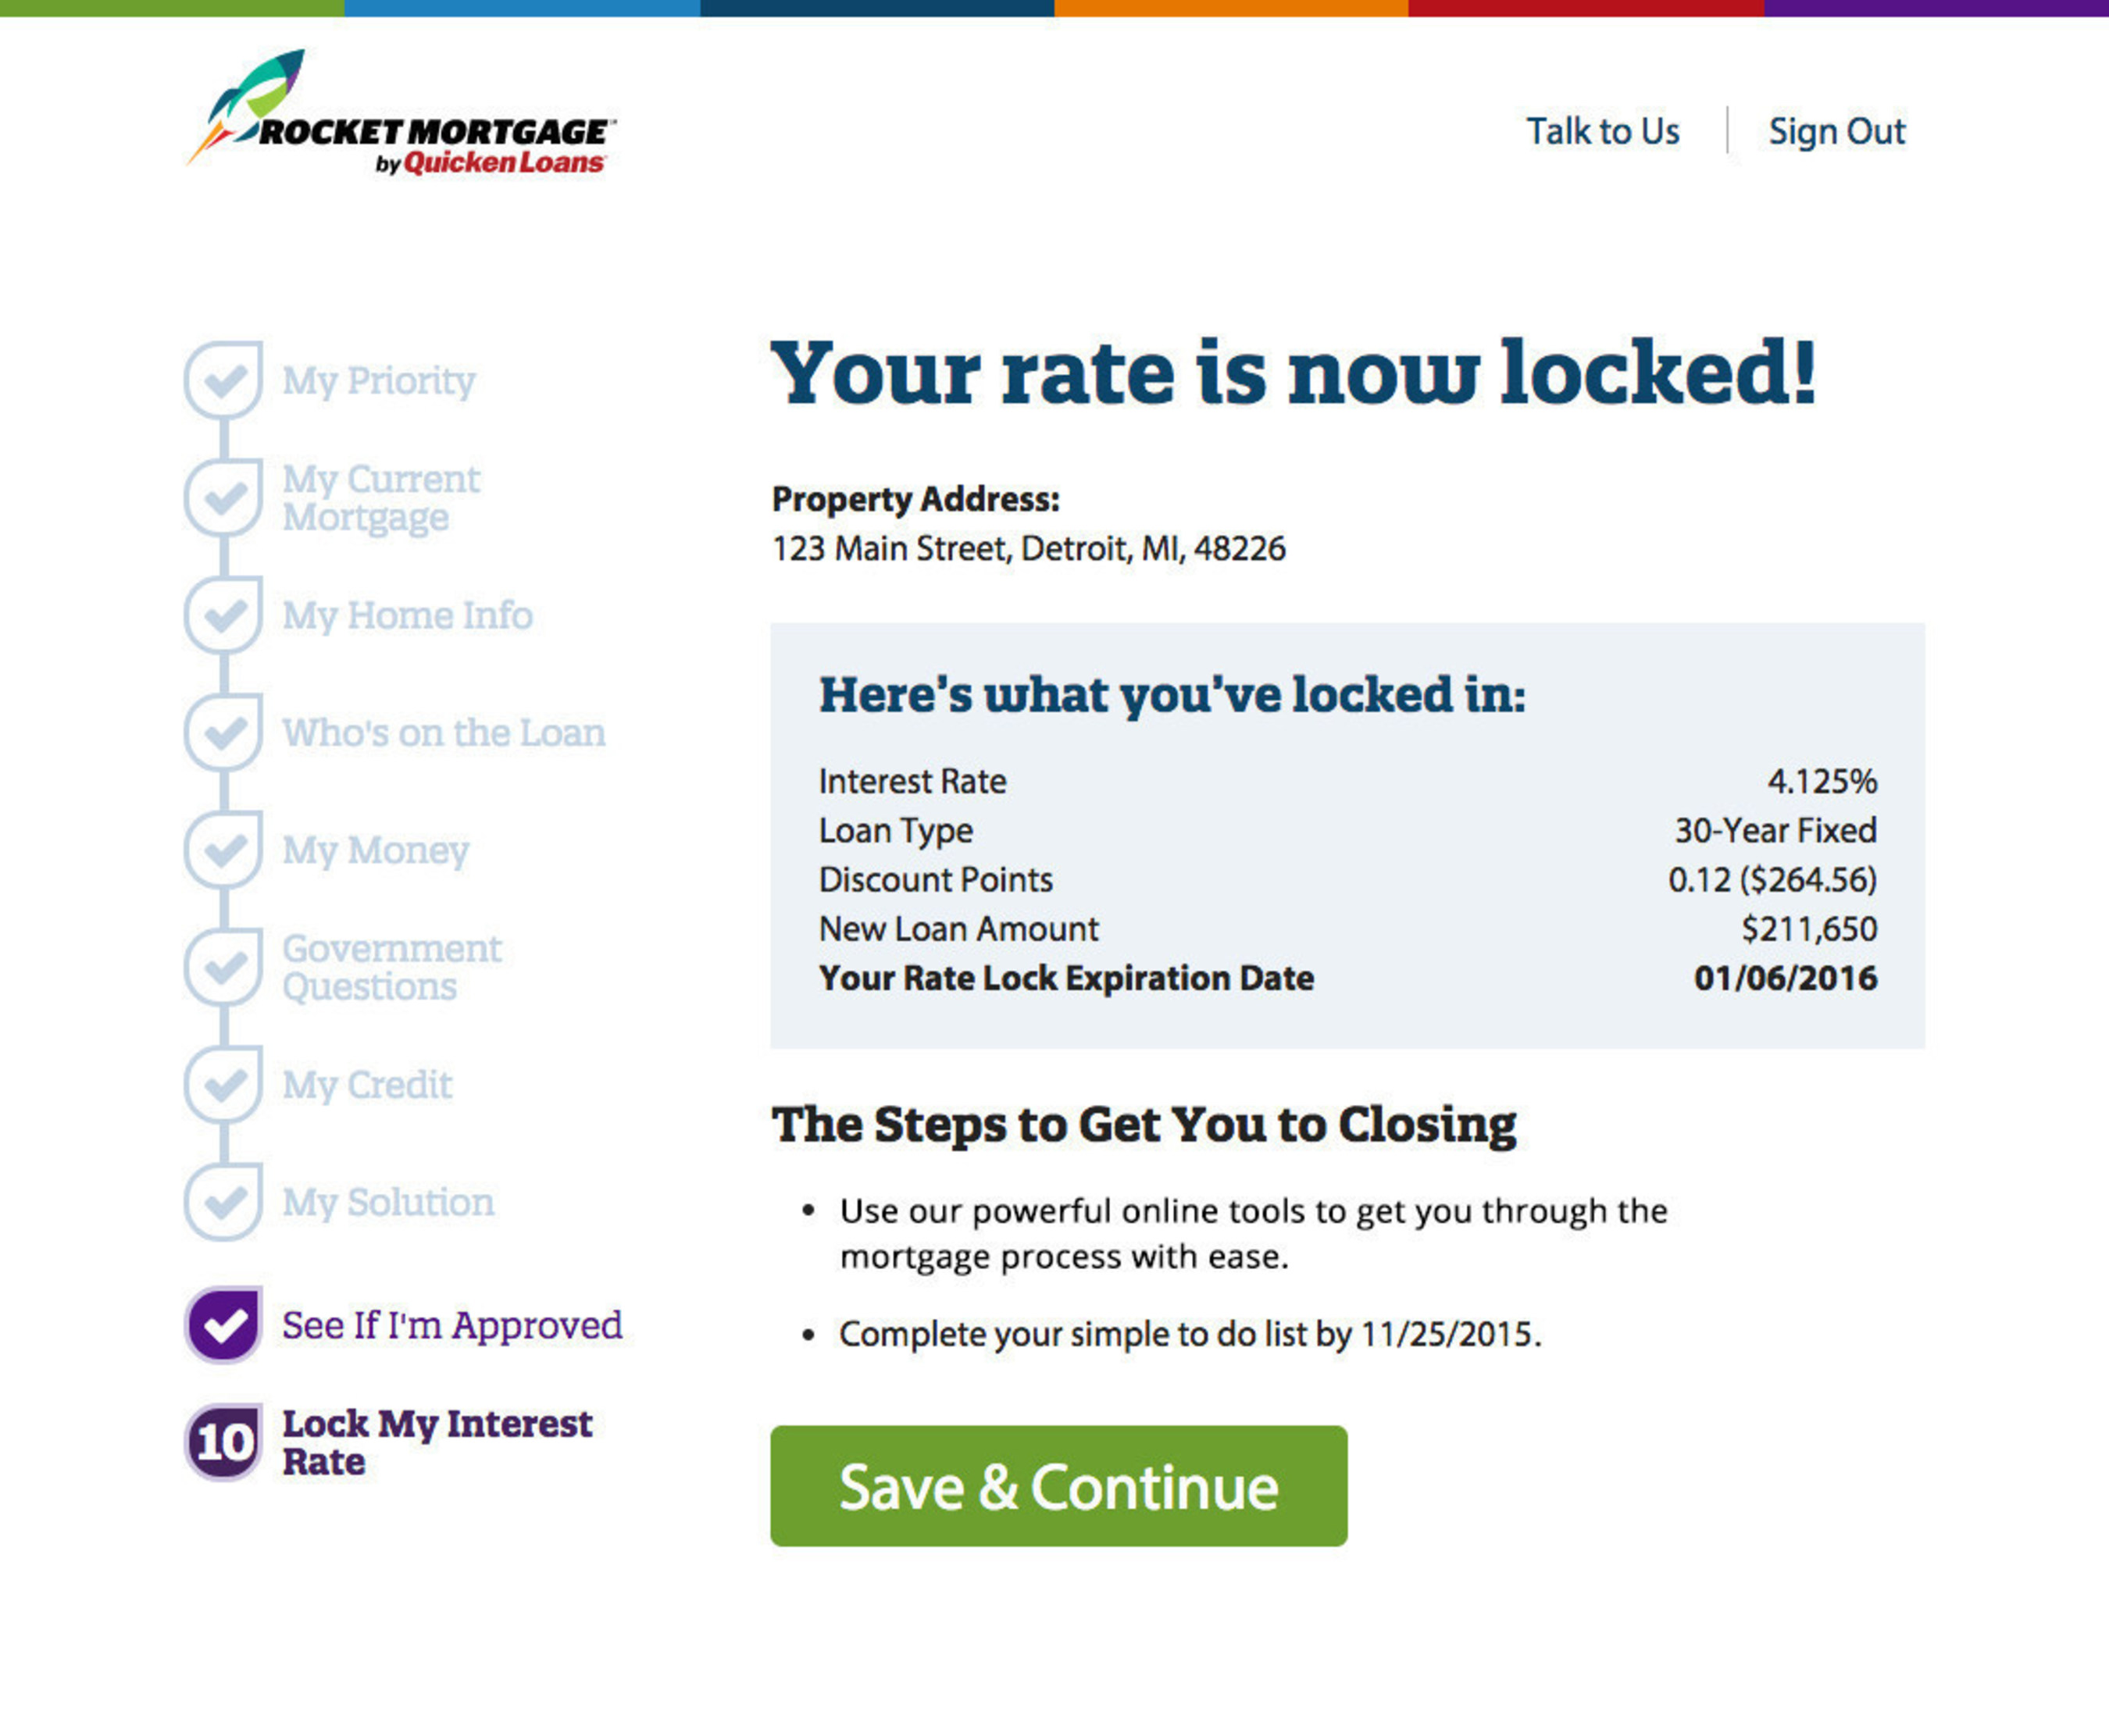 Rocket Mortgage users can lock their rate completely online